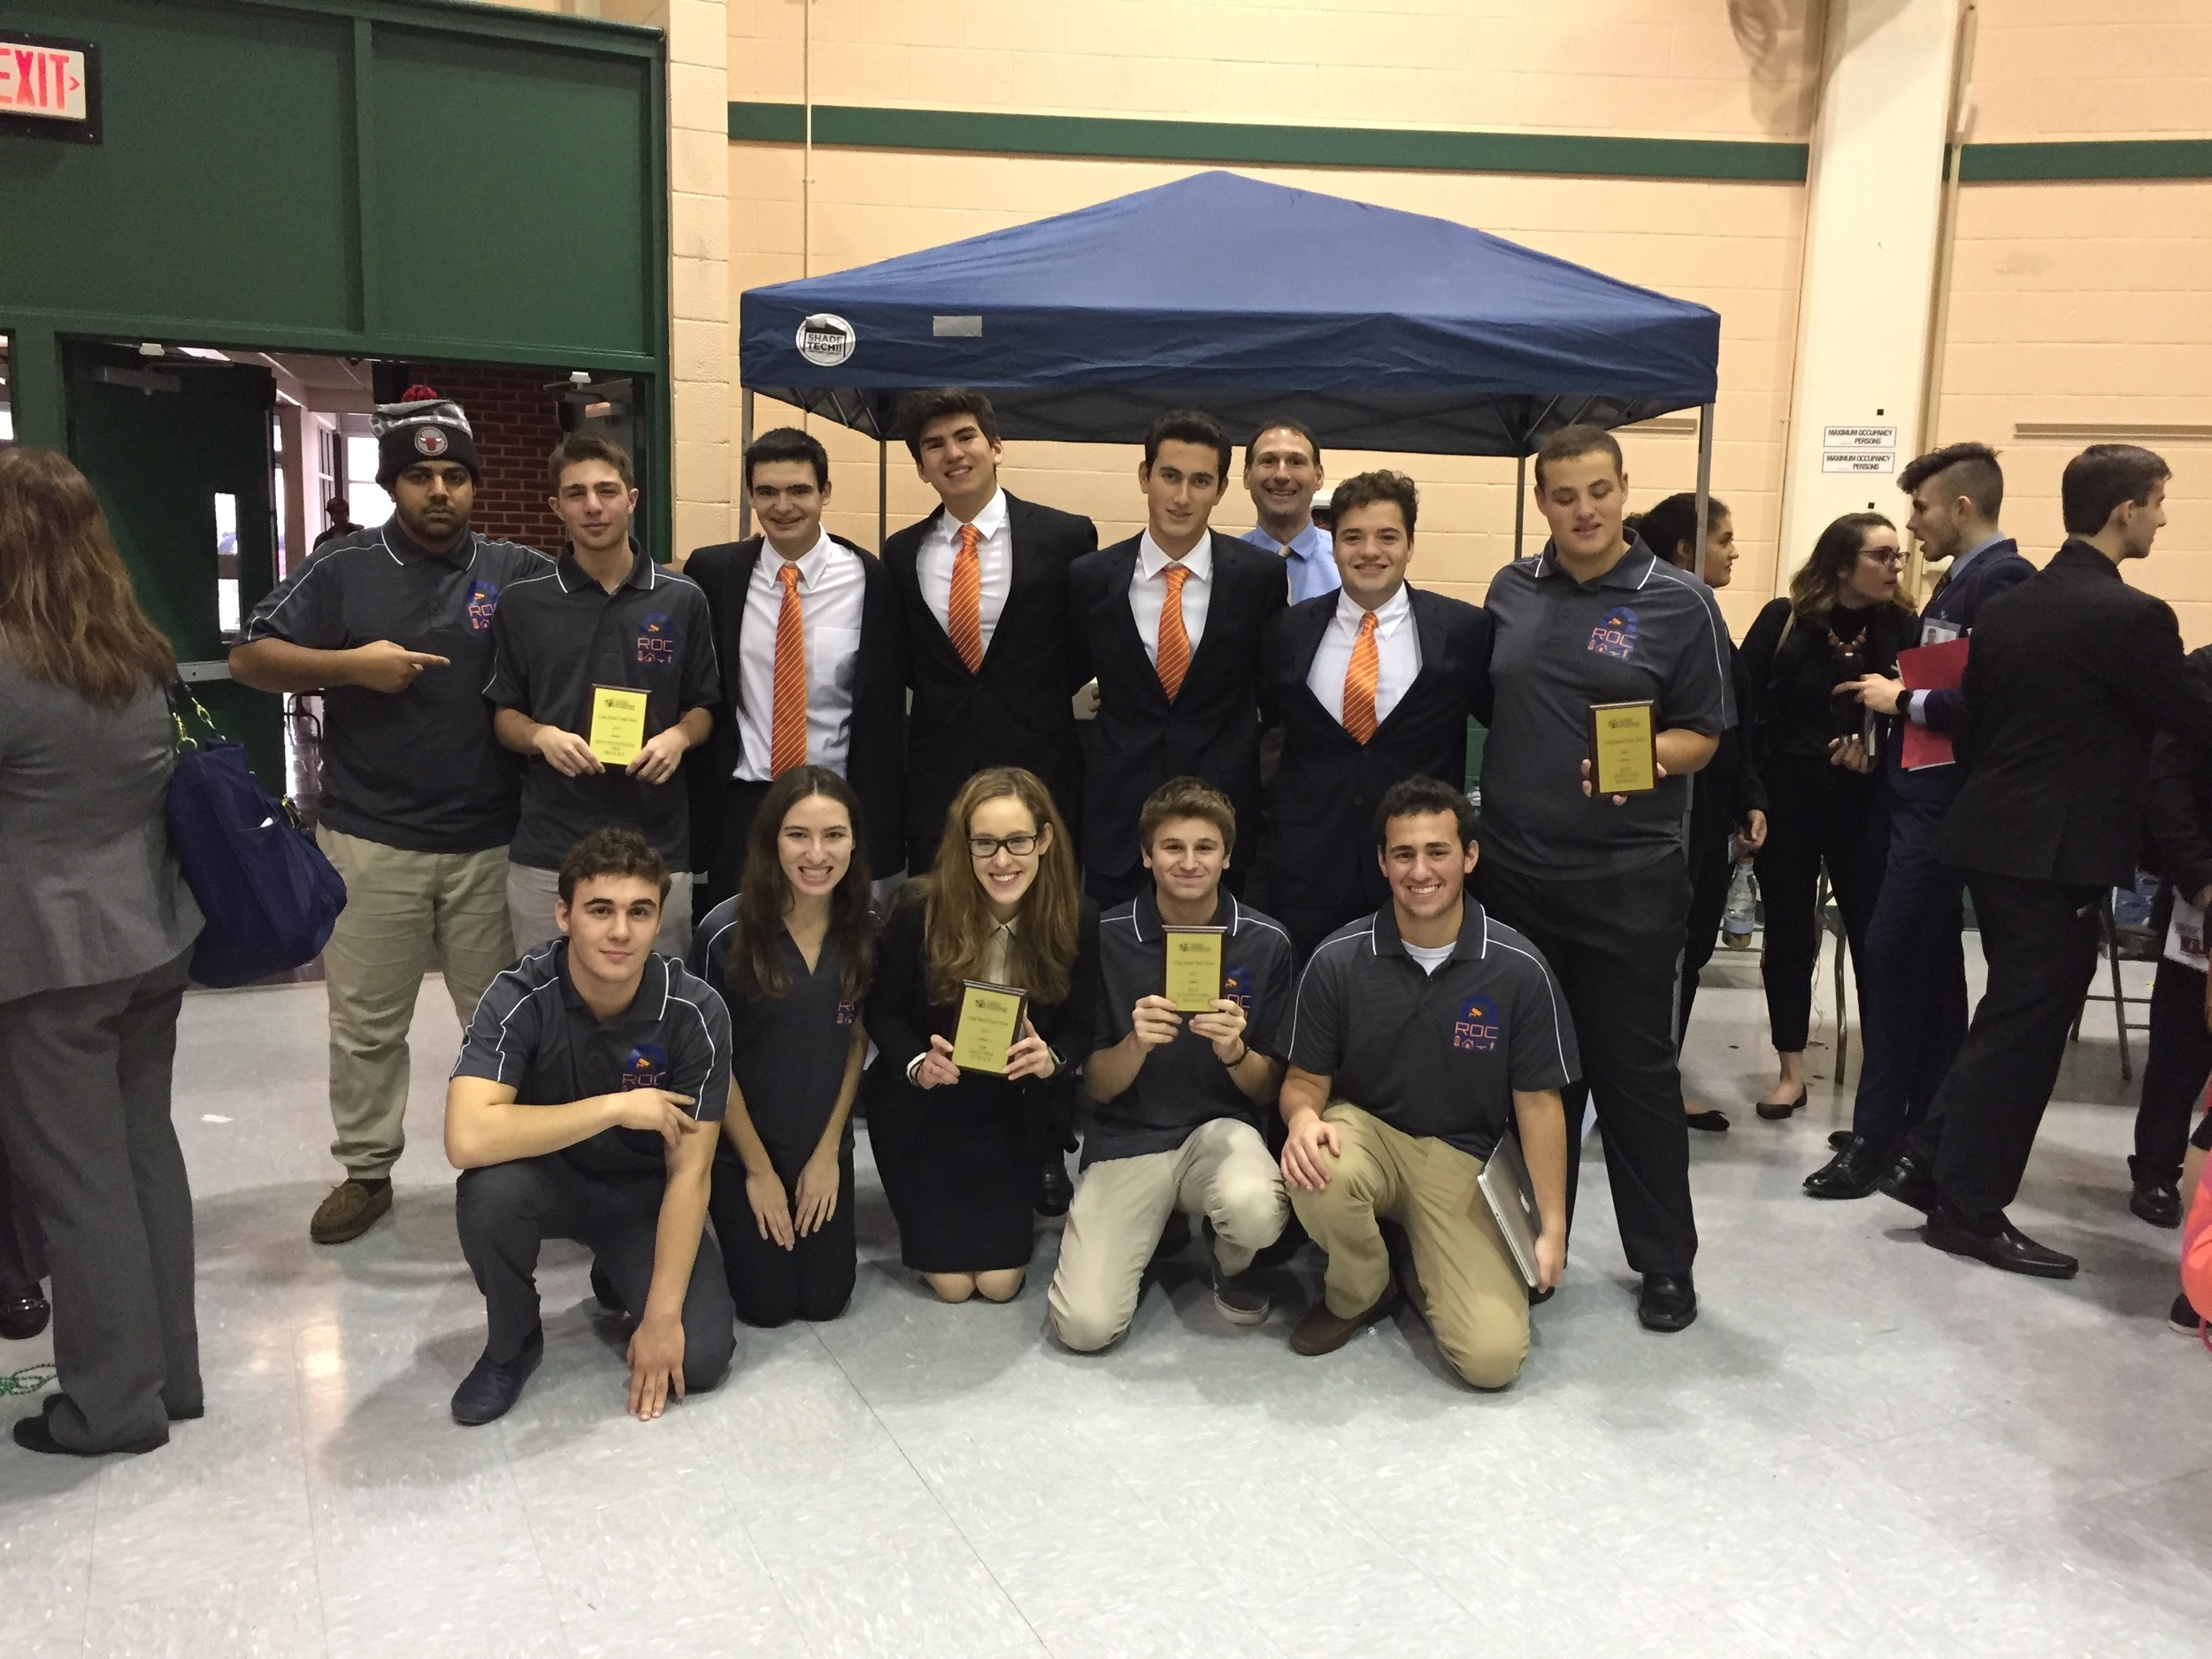 Hewlett High School seniors in the virtual enterprise program took home several awards at the Long Island Trade Show for their firm, ROC Security.